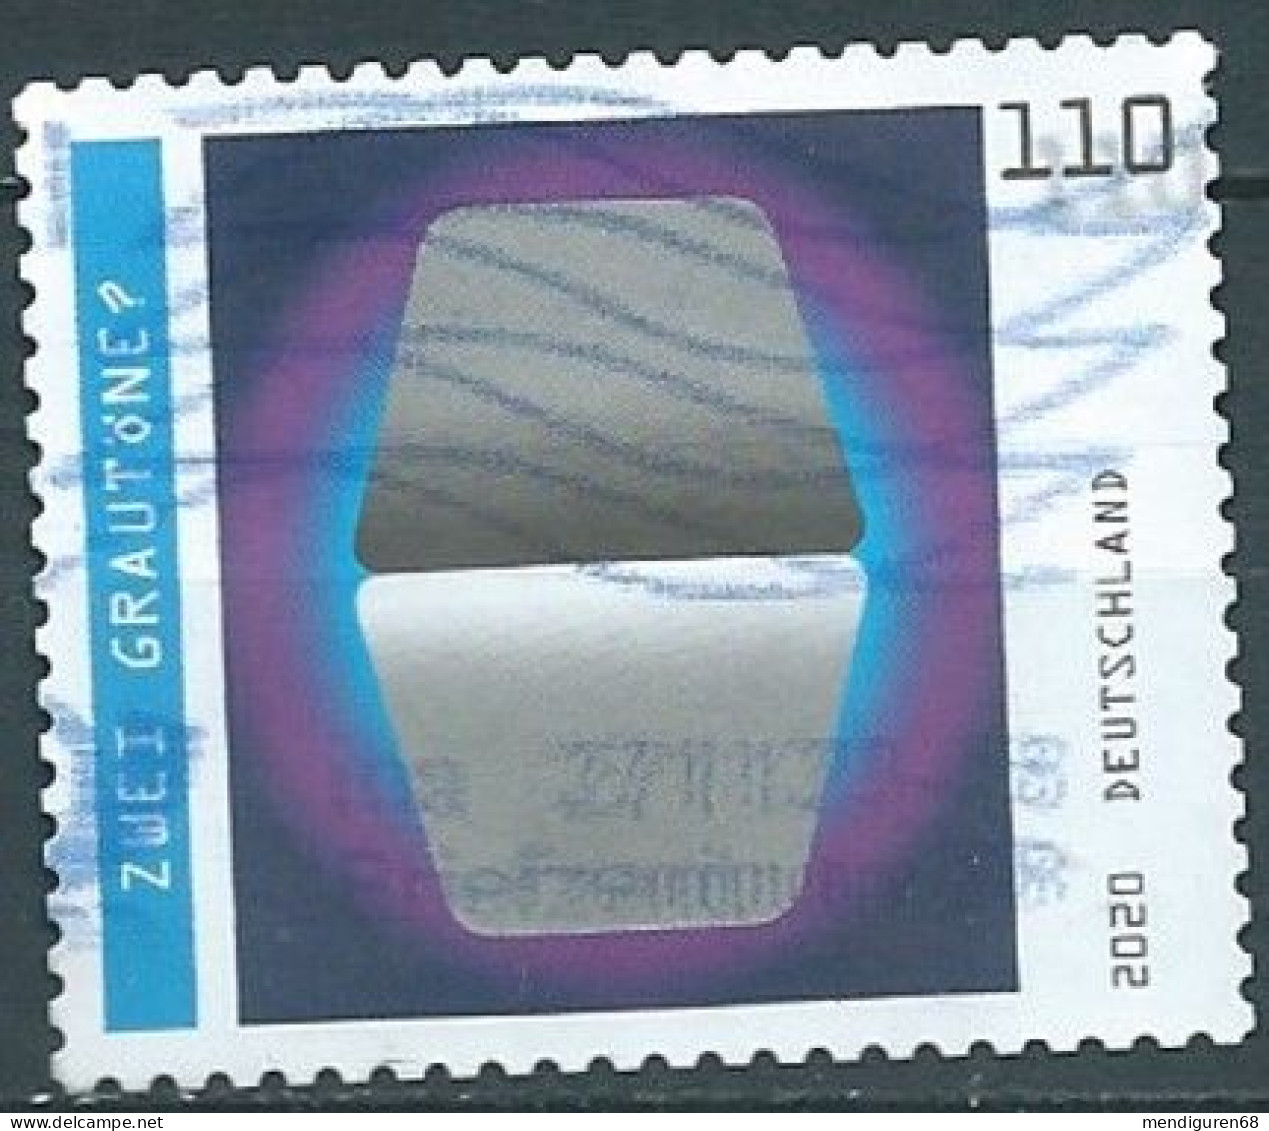 ALLEMAGNE ALEMANIA GERMANY DEUTSCHLAND BUND 2020 OPTICAL ILLUSIONS: TWO SHADES OF GREY? S/A MI 3540 YT 3319 SN 3166 SG 4 - Used Stamps